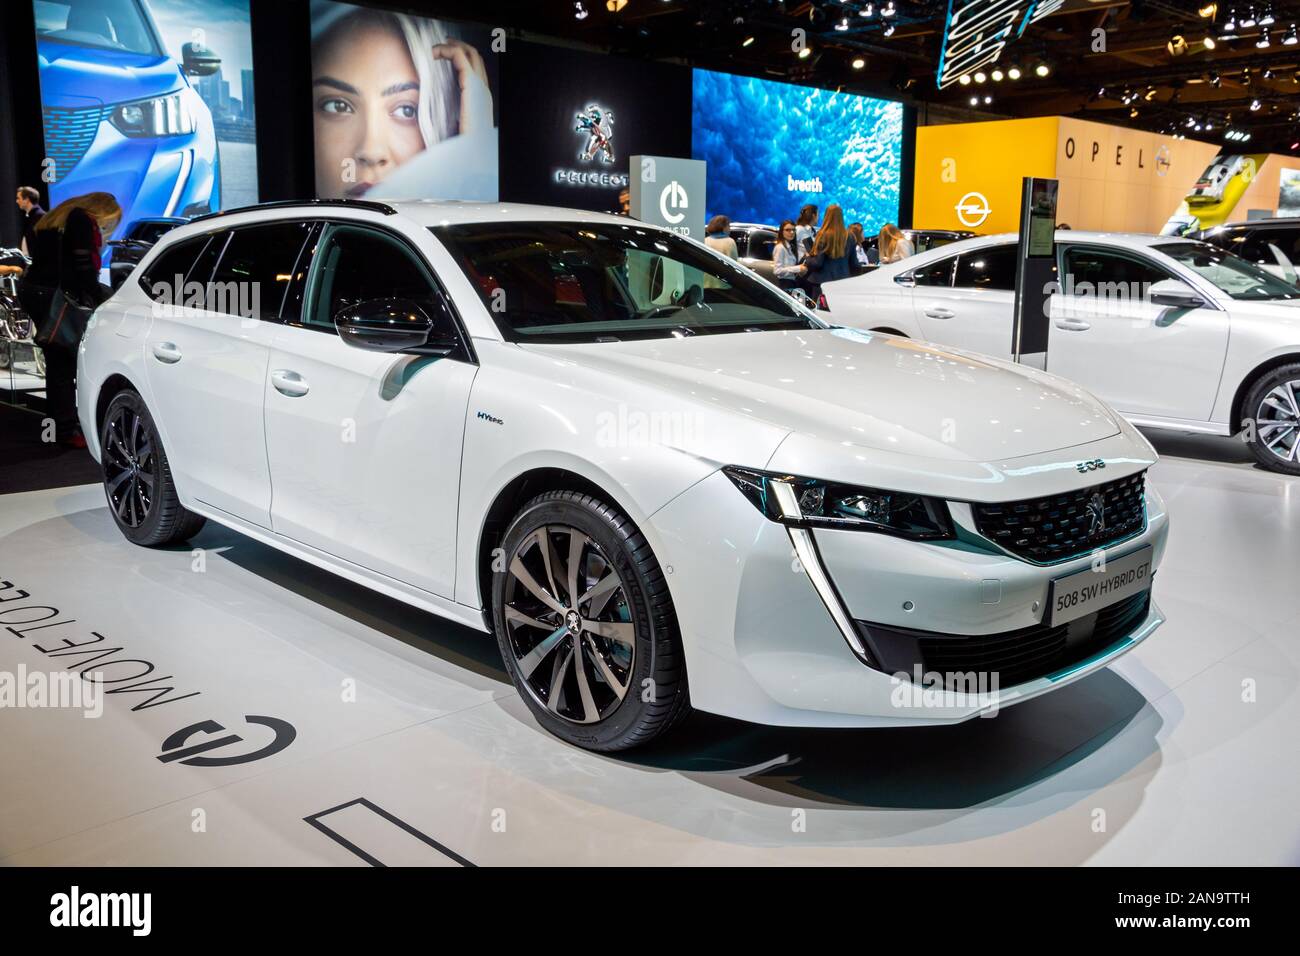 Brussels Jan 9 2020 New Peugeot 508 Sw Hybrid Gt Line Car Model Presented At The Brussels Autosalon 2020 Motor Show Stock Photo Alamy